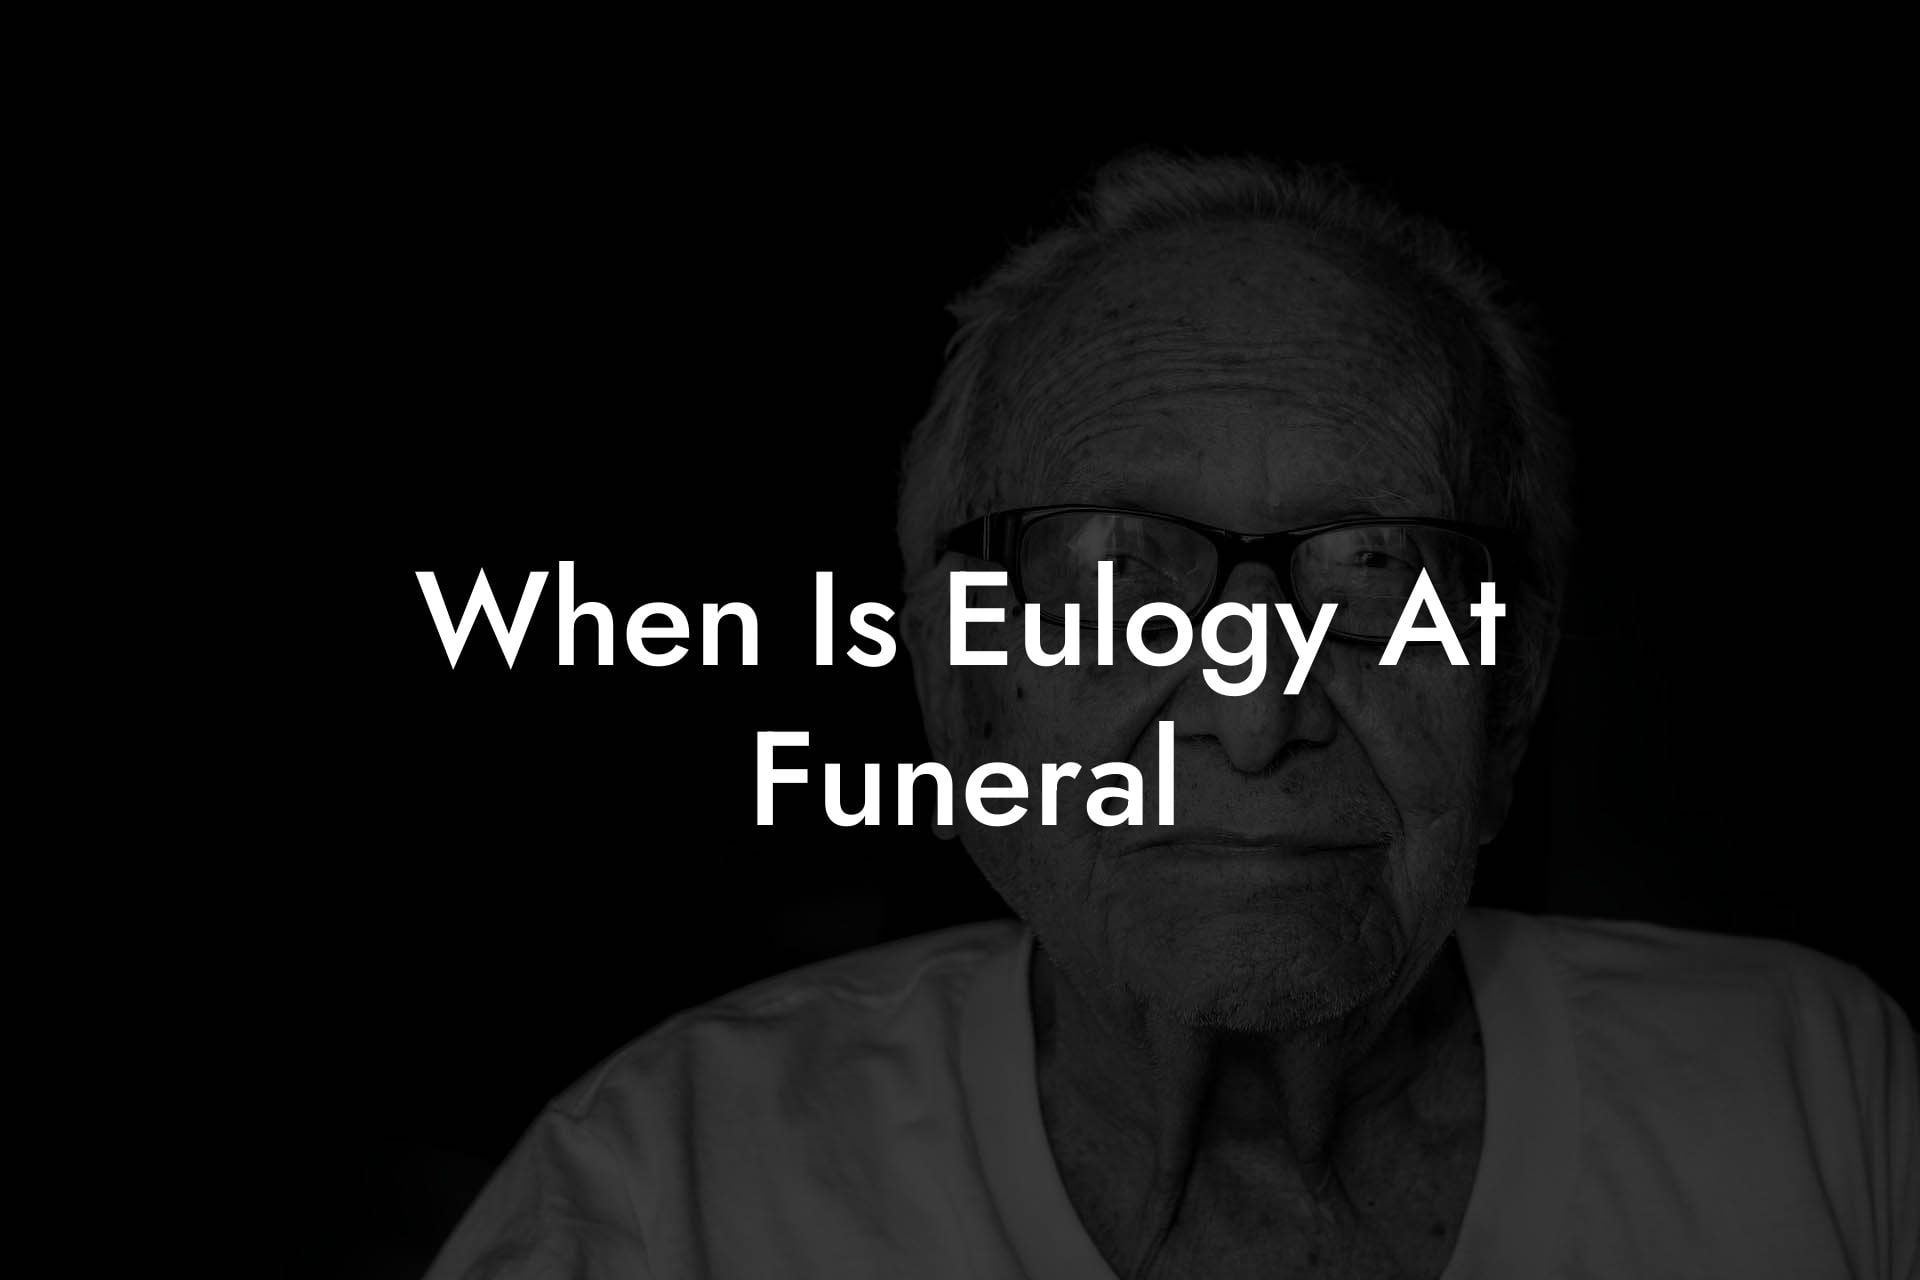 When Is Eulogy At Funeral